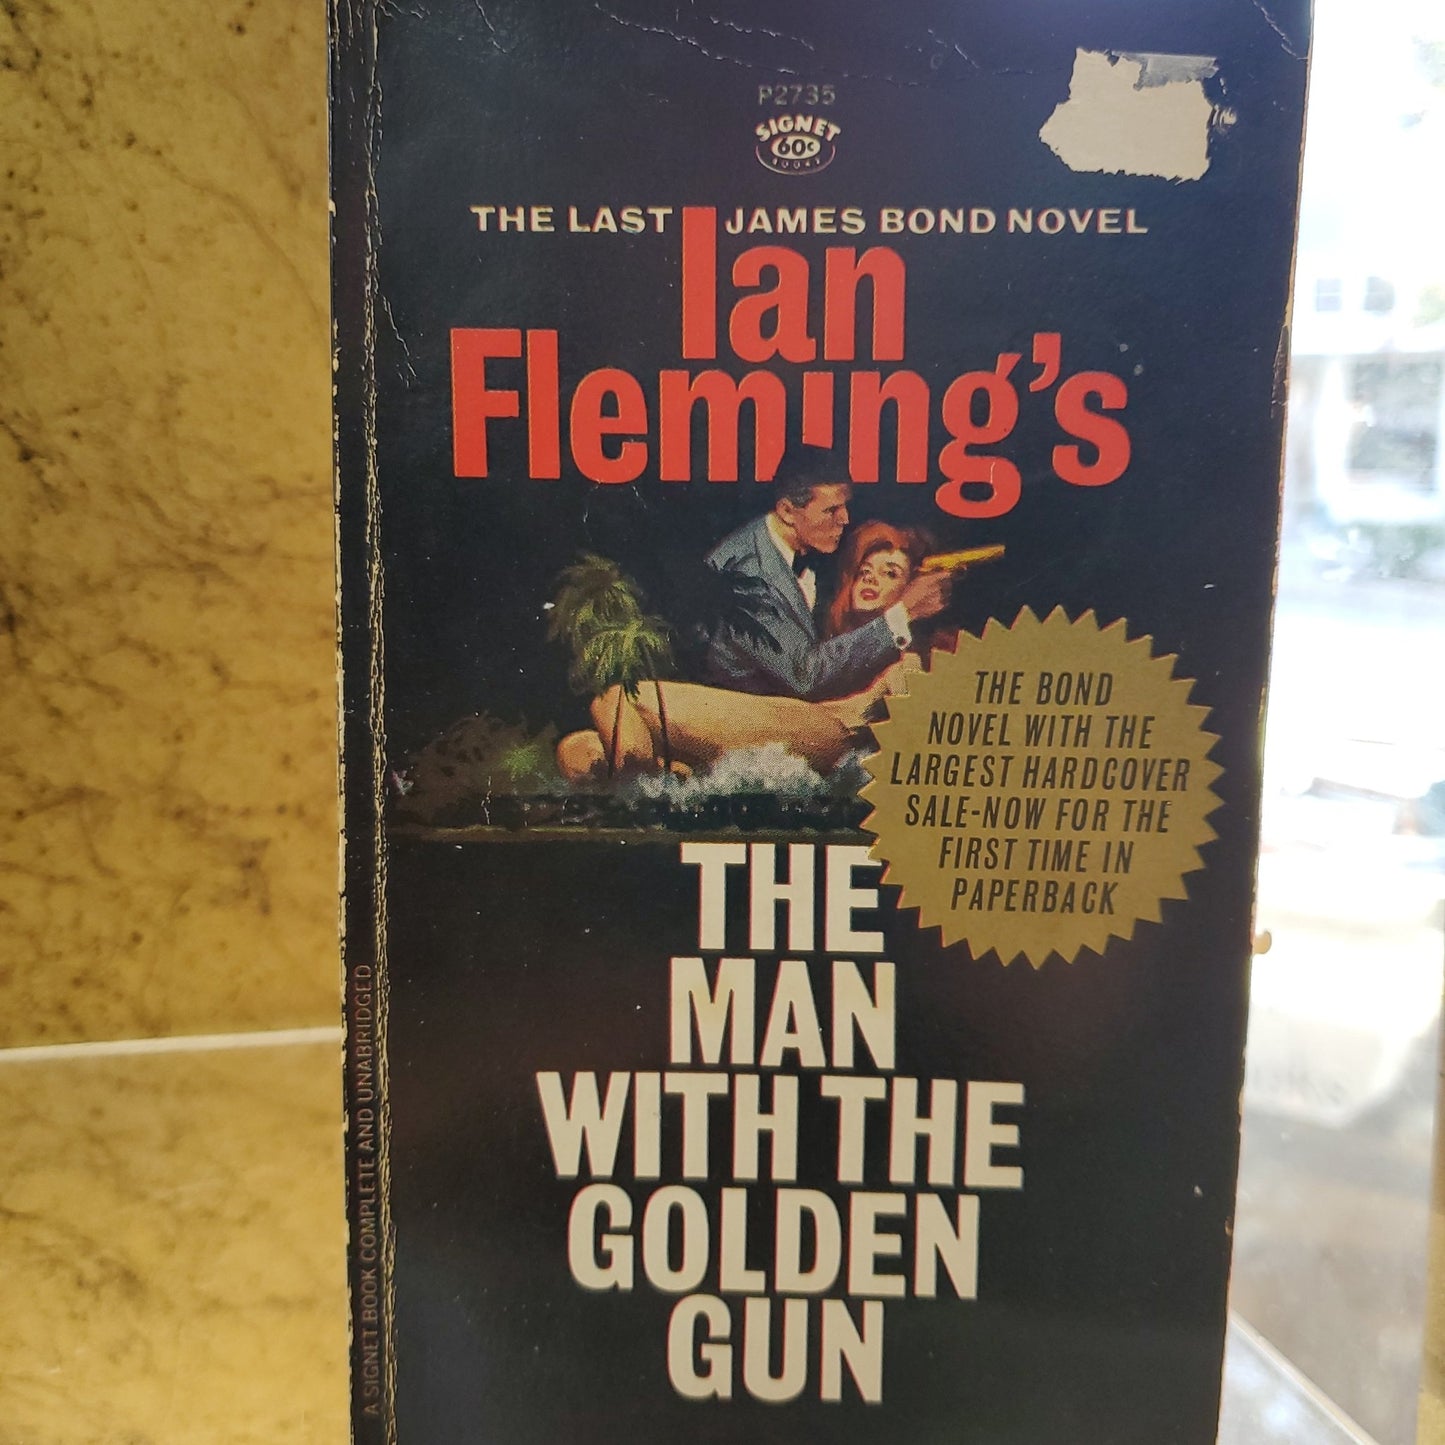 The Man with the Golden Gun - [ash-ling] Booksellers